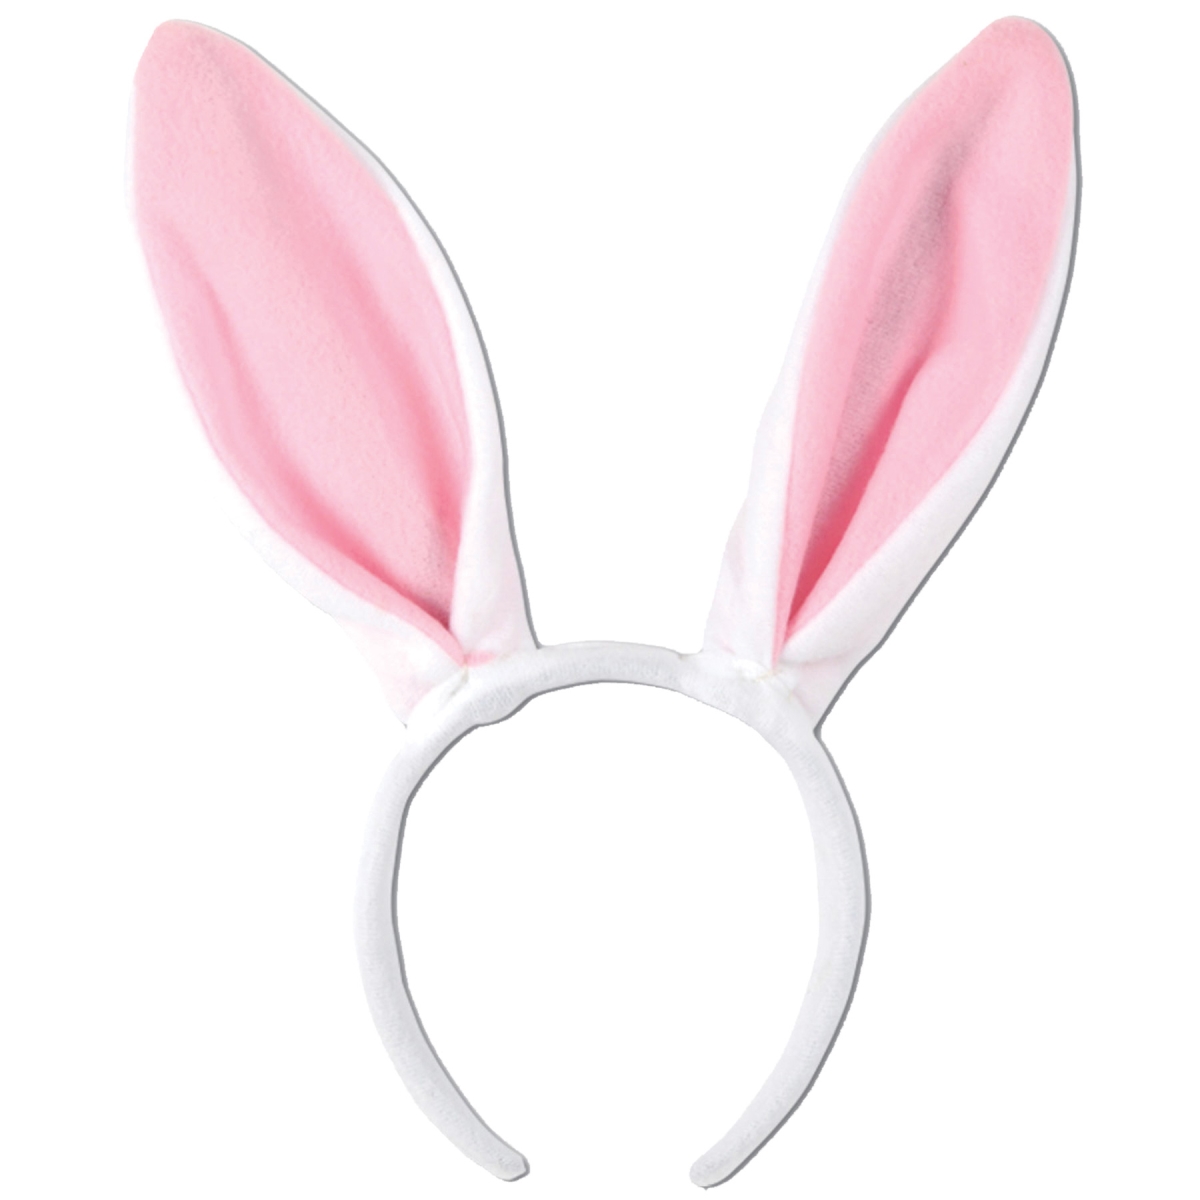 Picture of Morris Costumes BG40760 Bunny Ears White with Pink Lining Headband